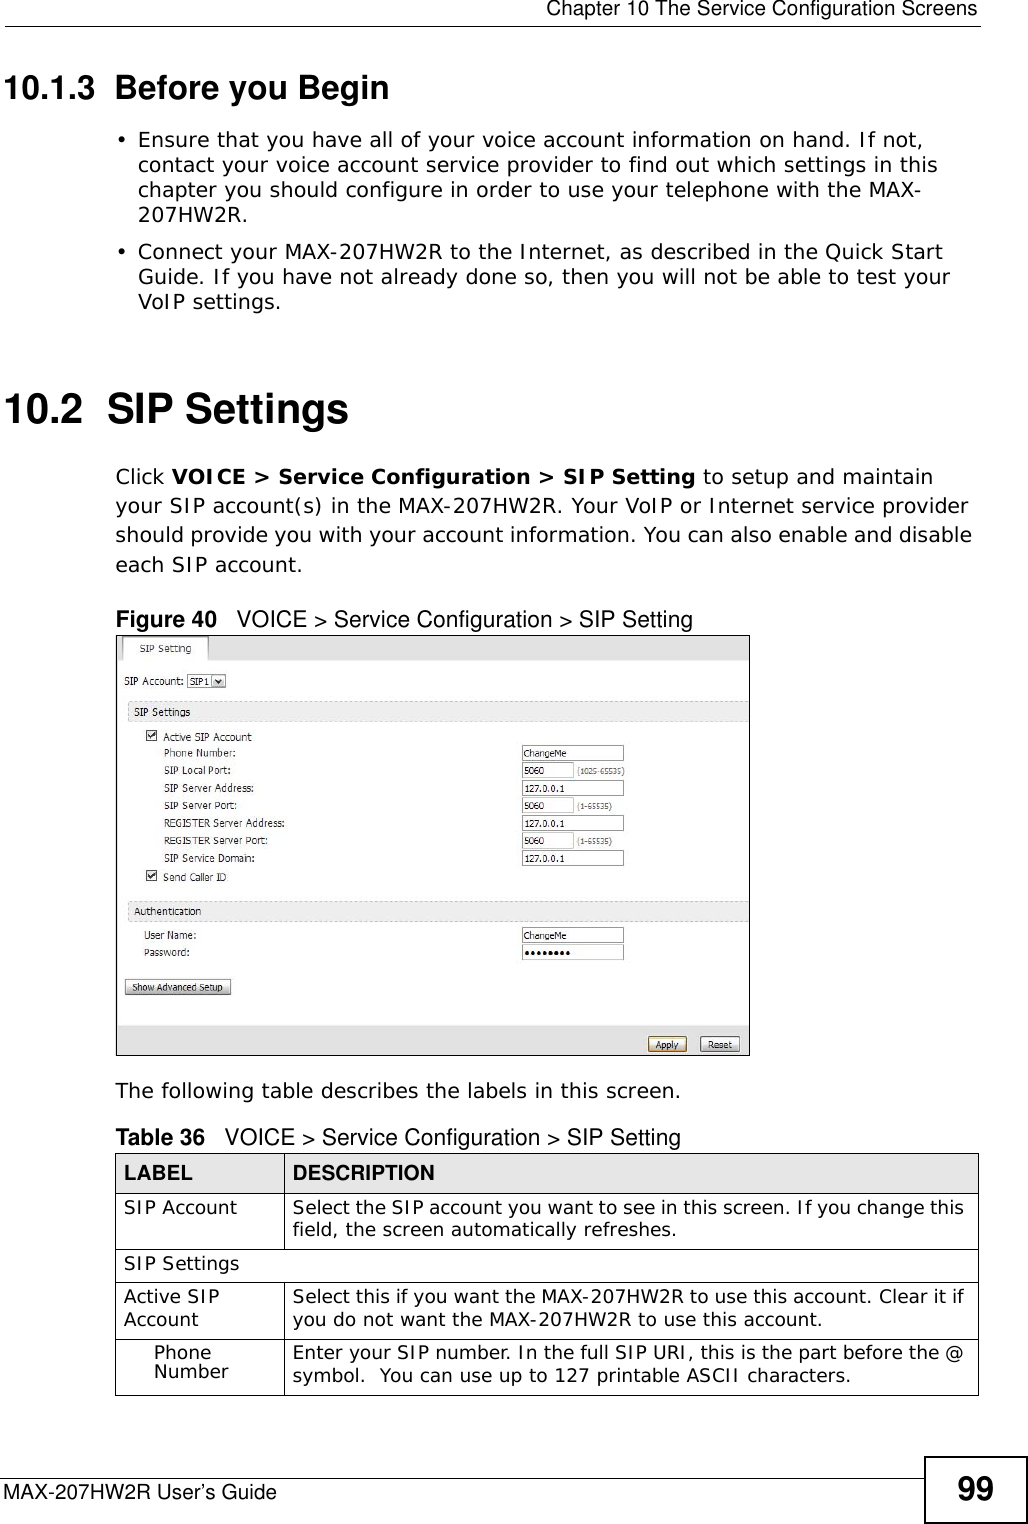  Chapter 10 The Service Configuration ScreensMAX-207HW2R User’s Guide 9910.1.3  Before you Begin• Ensure that you have all of your voice account information on hand. If not, contact your voice account service provider to find out which settings in this chapter you should configure in order to use your telephone with the MAX-207HW2R.• Connect your MAX-207HW2R to the Internet, as described in the Quick Start Guide. If you have not already done so, then you will not be able to test your VoIP settings.10.2  SIP SettingsClick VOICE &gt; Service Configuration &gt; SIP Setting to setup and maintain your SIP account(s) in the MAX-207HW2R. Your VoIP or Internet service provider should provide you with your account information. You can also enable and disable each SIP account.Figure 40   VOICE &gt; Service Configuration &gt; SIP SettingThe following table describes the labels in this screen.  Table 36   VOICE &gt; Service Configuration &gt; SIP SettingLABEL DESCRIPTIONSIP Account Select the SIP account you want to see in this screen. If you change this field, the screen automatically refreshes.SIP SettingsActive SIP Account Select this if you want the MAX-207HW2R to use this account. Clear it if you do not want the MAX-207HW2R to use this account.Phone Number Enter your SIP number. In the full SIP URI, this is the part before the @ symbol.  You can use up to 127 printable ASCII characters.